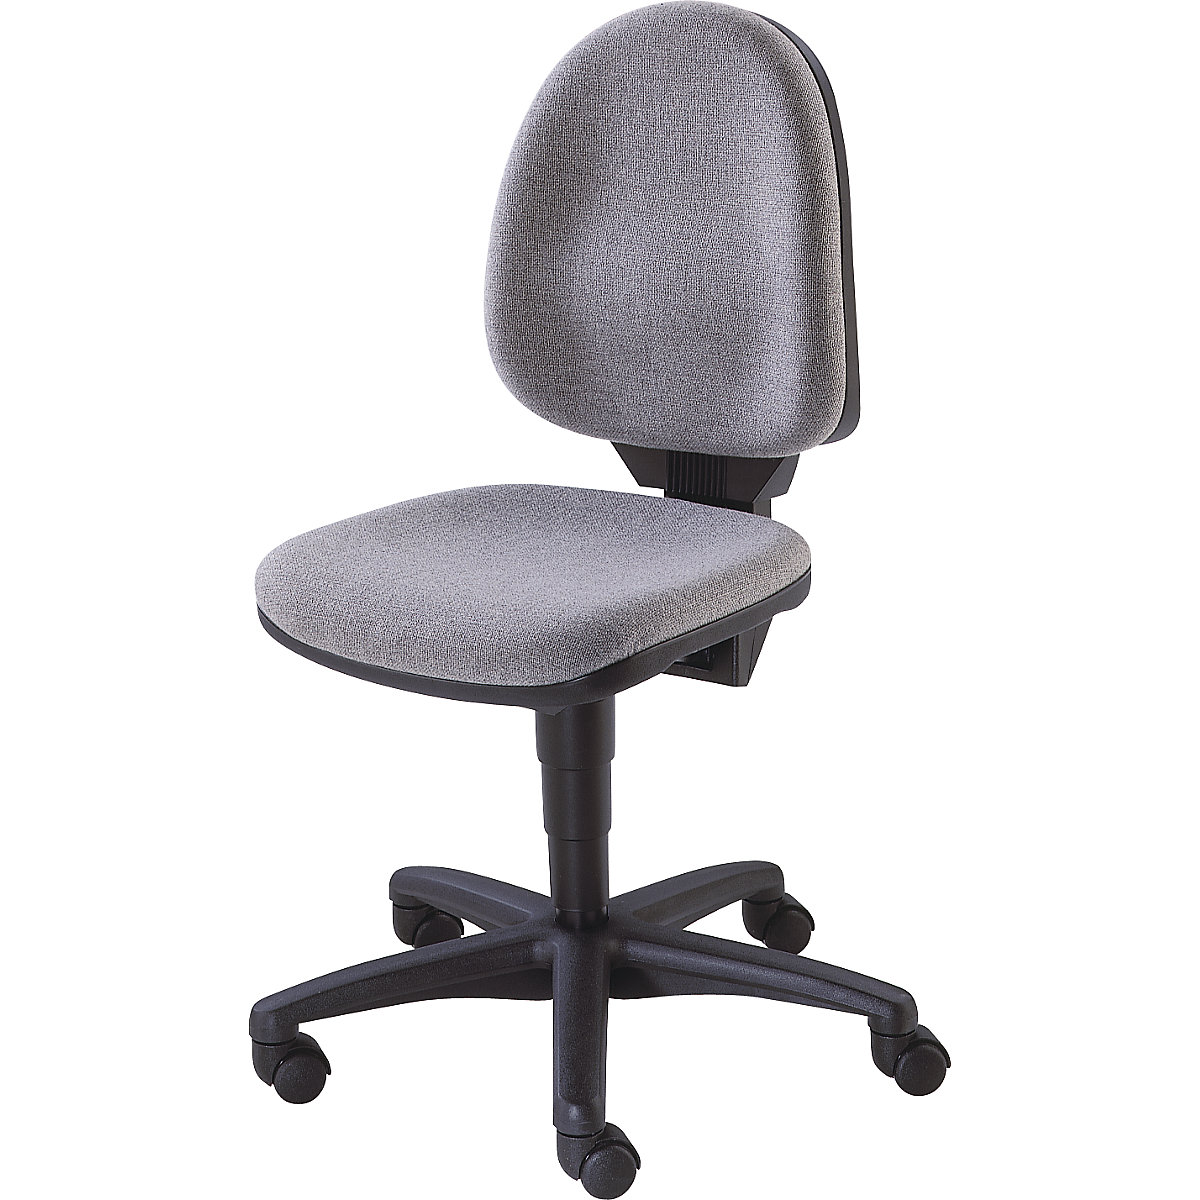 Standard swivel chair – Topstar, without arm rests, back rest 450 mm, fabric covering grey, frame black, 2+-3